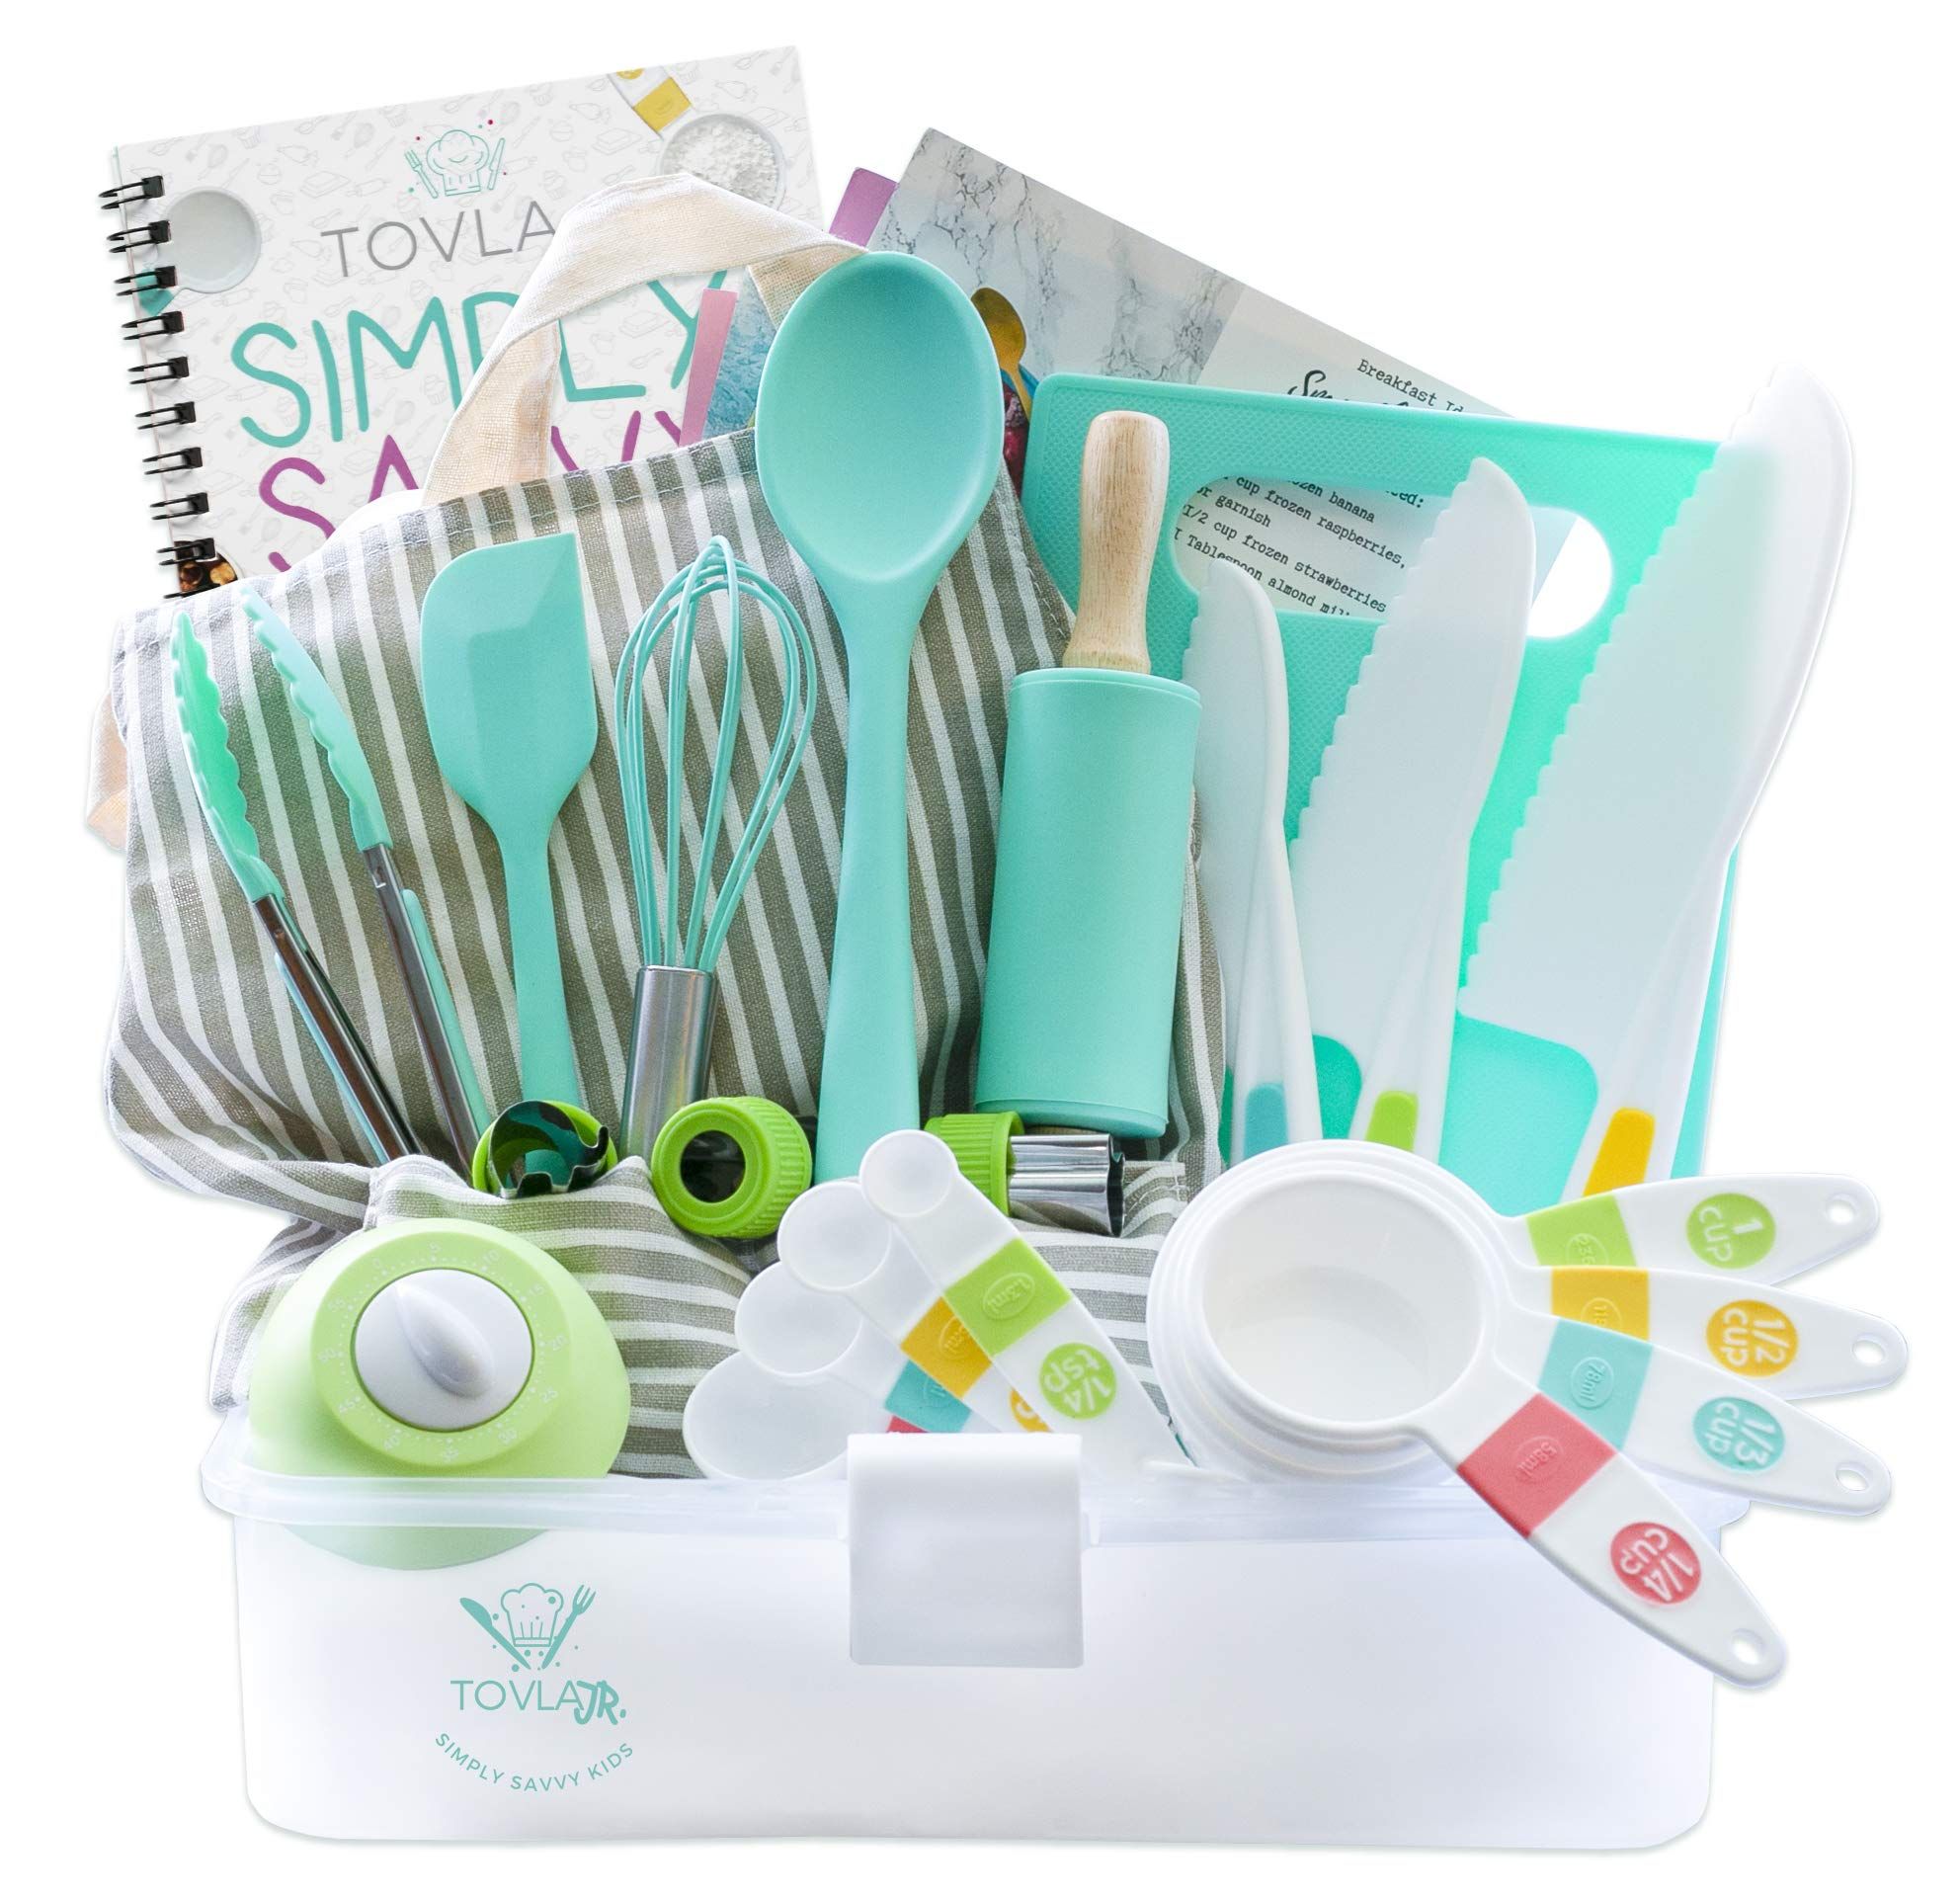 Tovla Jr. Kids Cooking and Baking Gift Set with Storage Case - Complete Cooking Supplies for the Jun | Amazon (US)